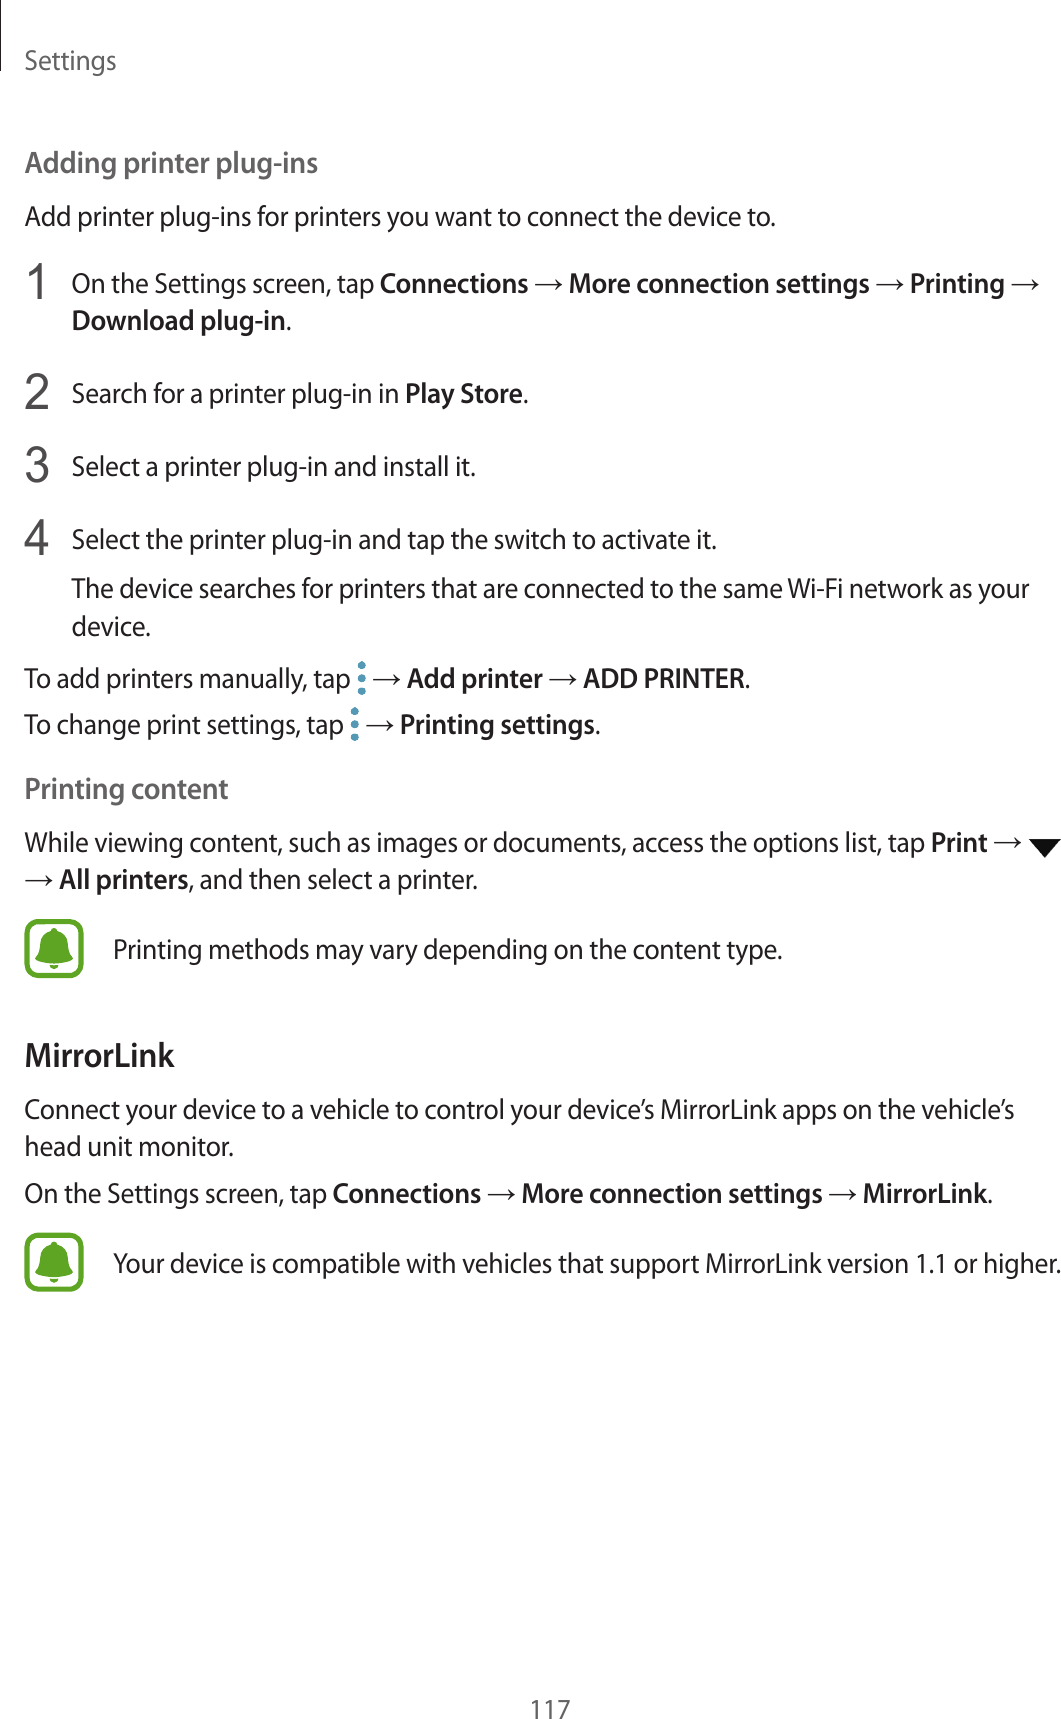 Settings117Adding printer plug-insAdd printer plug-ins for printers you want to connect the device to.1  On the Settings screen, tap Connections → More connection settings → Printing → Download plug-in.2  Search for a printer plug-in in Play Store.3  Select a printer plug-in and install it.4  Select the printer plug-in and tap the switch to activate it.The device searches for printers that are connected to the same Wi-Fi network as your device.To add printers manually, tap   → Add printer → ADD PRINTER.To change print settings, tap   → Printing settings.Printing contentWhile viewing content, such as images or documents, access the options list, tap Print →   → All printers, and then select a printer.Printing methods may vary depending on the content type.MirrorLinkConnect your device to a vehicle to control your device’s MirrorLink apps on the vehicle’s head unit monitor.On the Settings screen, tap Connections → More connection settings → MirrorLink.Your device is compatible with vehicles that support MirrorLink version 1.1 or higher.